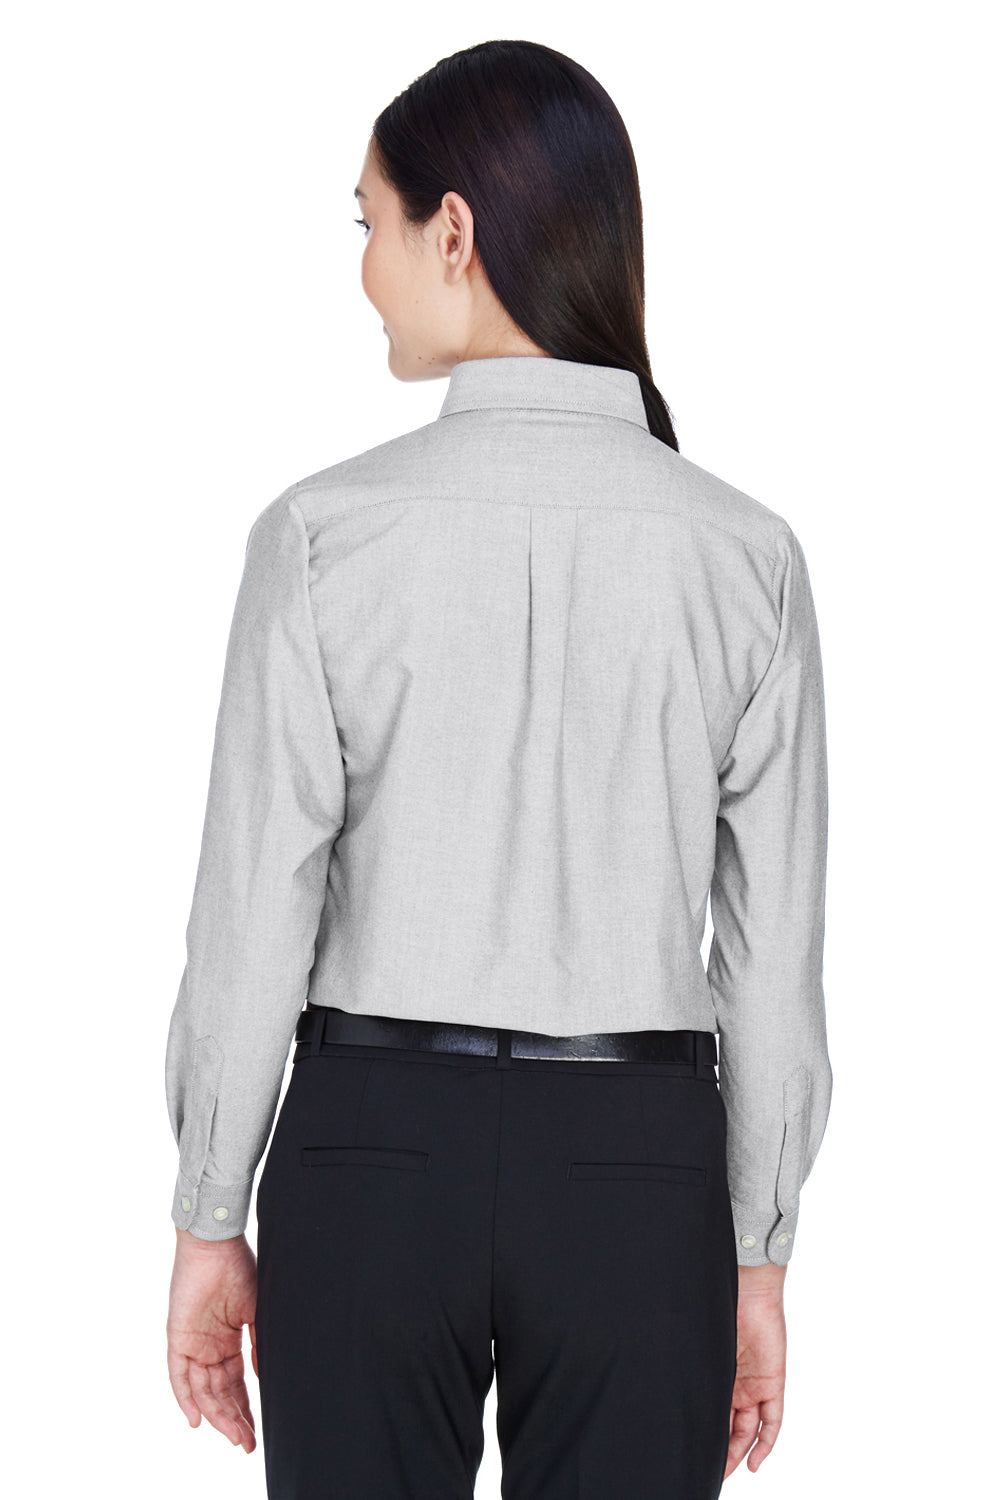 UltraClub 8990 Womens Classic Oxford Wrinkle Resistant Long Sleeve Button Down Shirt w/ Pocket Charcoal Grey Back